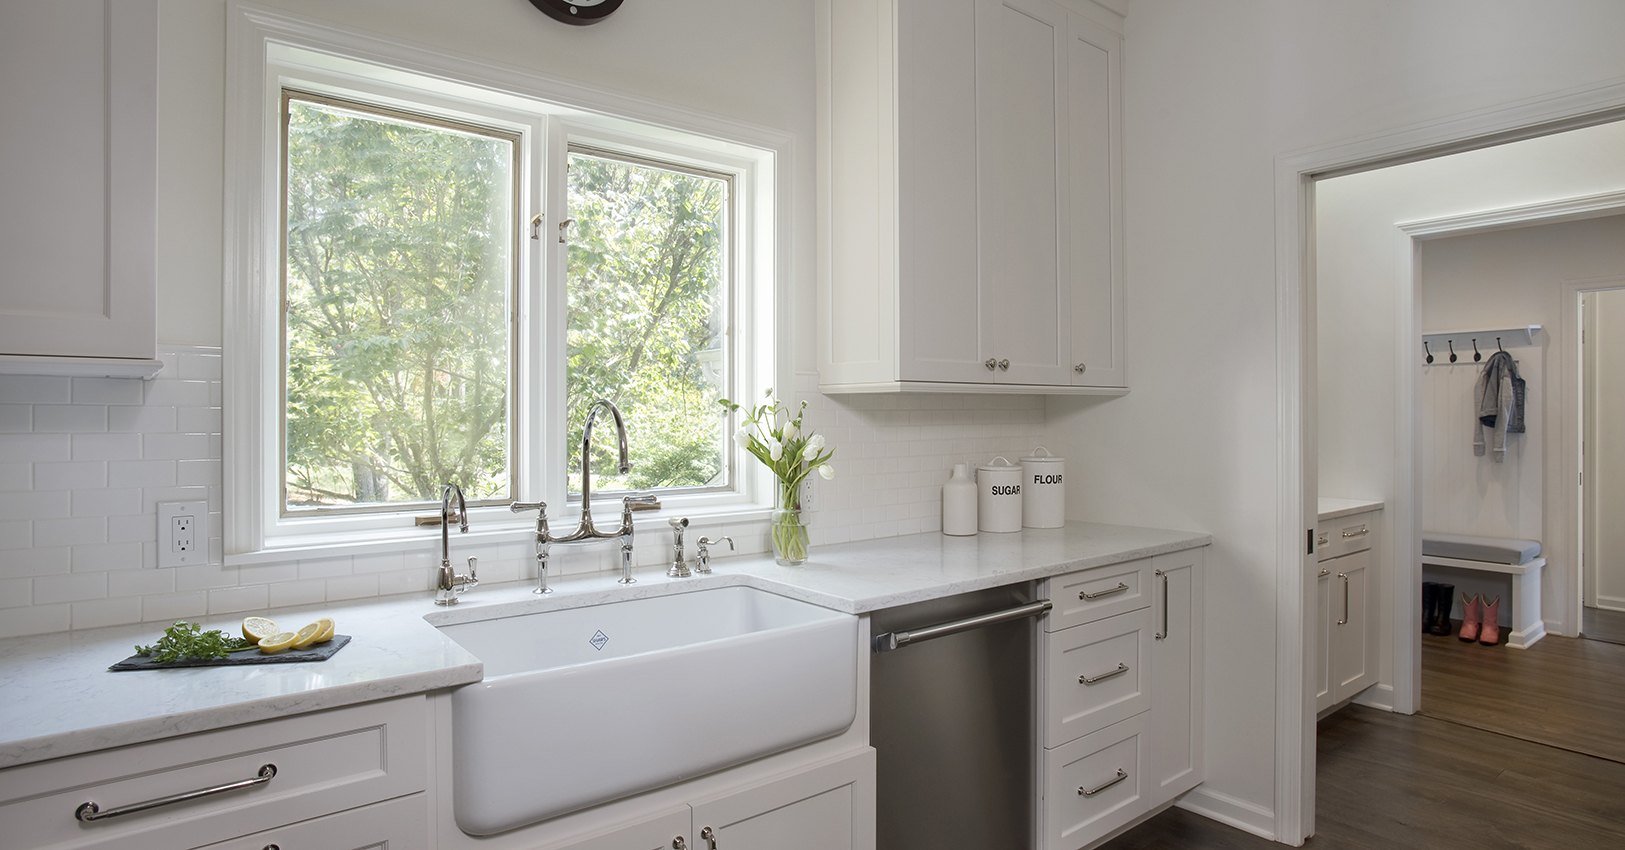 Rohl white farm sink grounds this sink elevation in this kitchen redesign